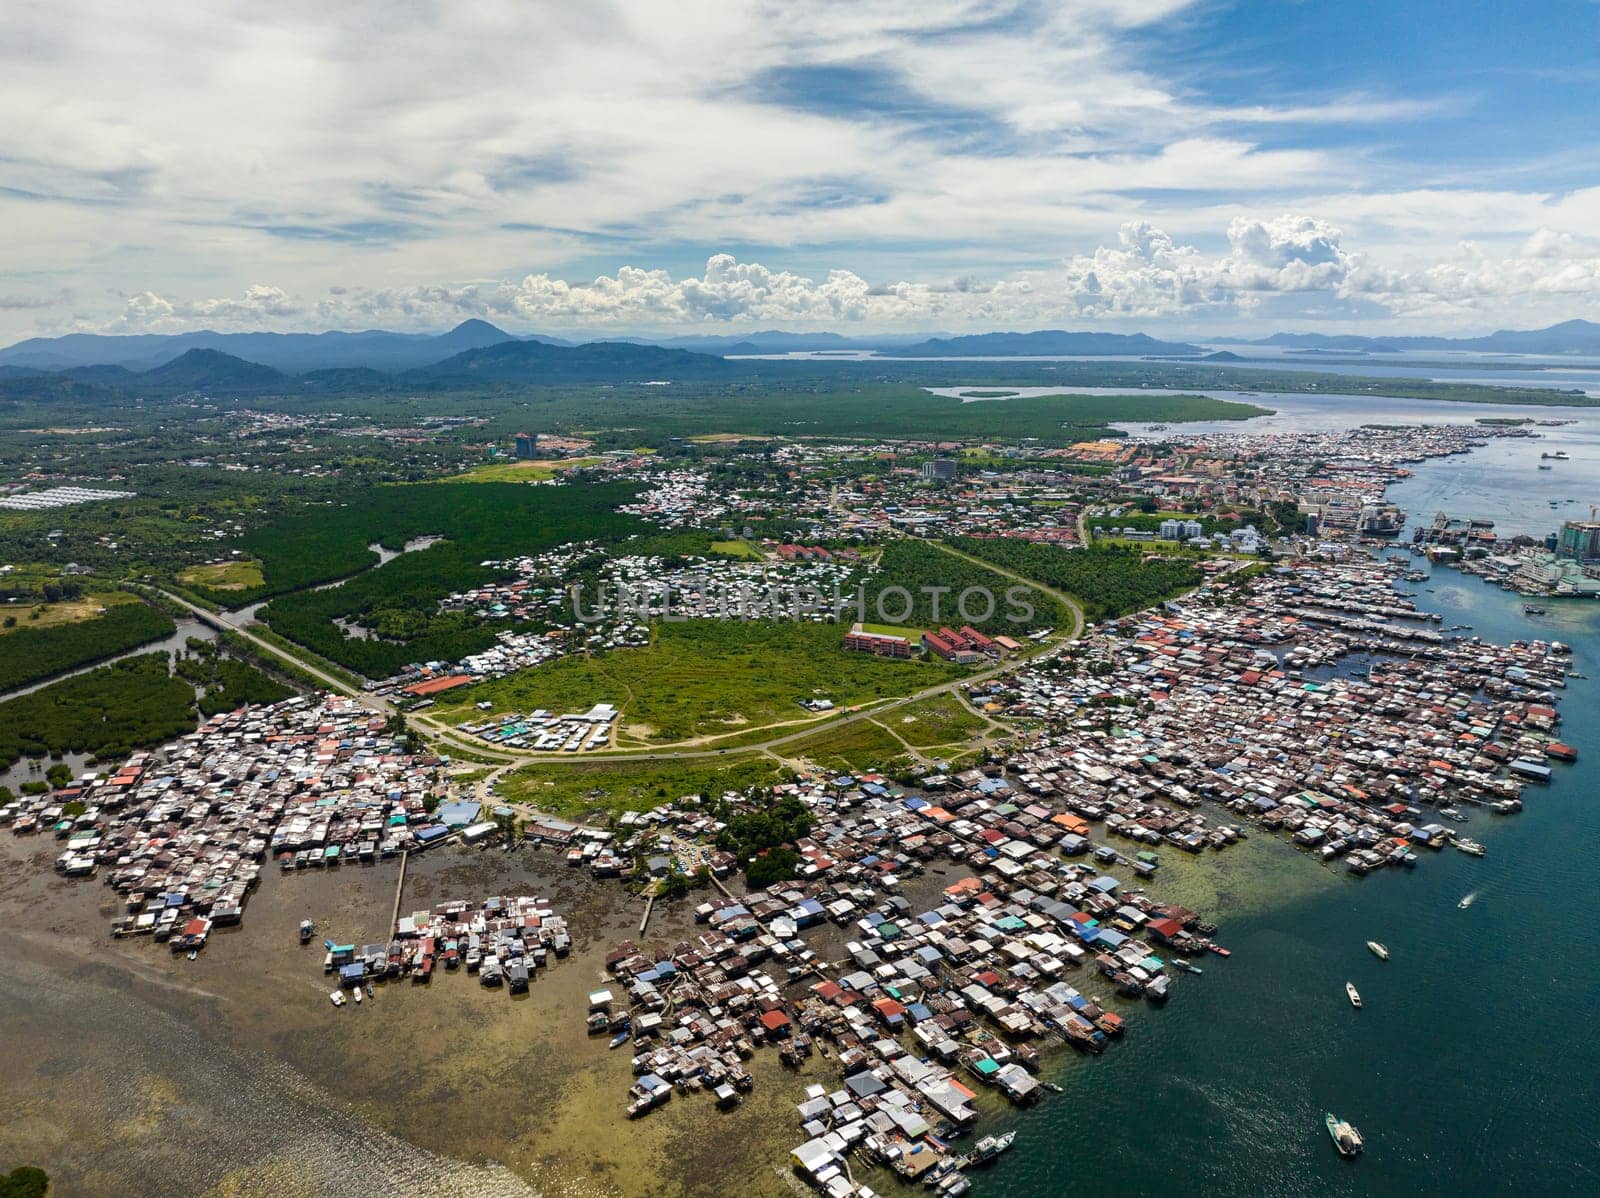 Panorama of the city of Semporna with residential buildings view from above. Borneo, Sabah, Malaysia.